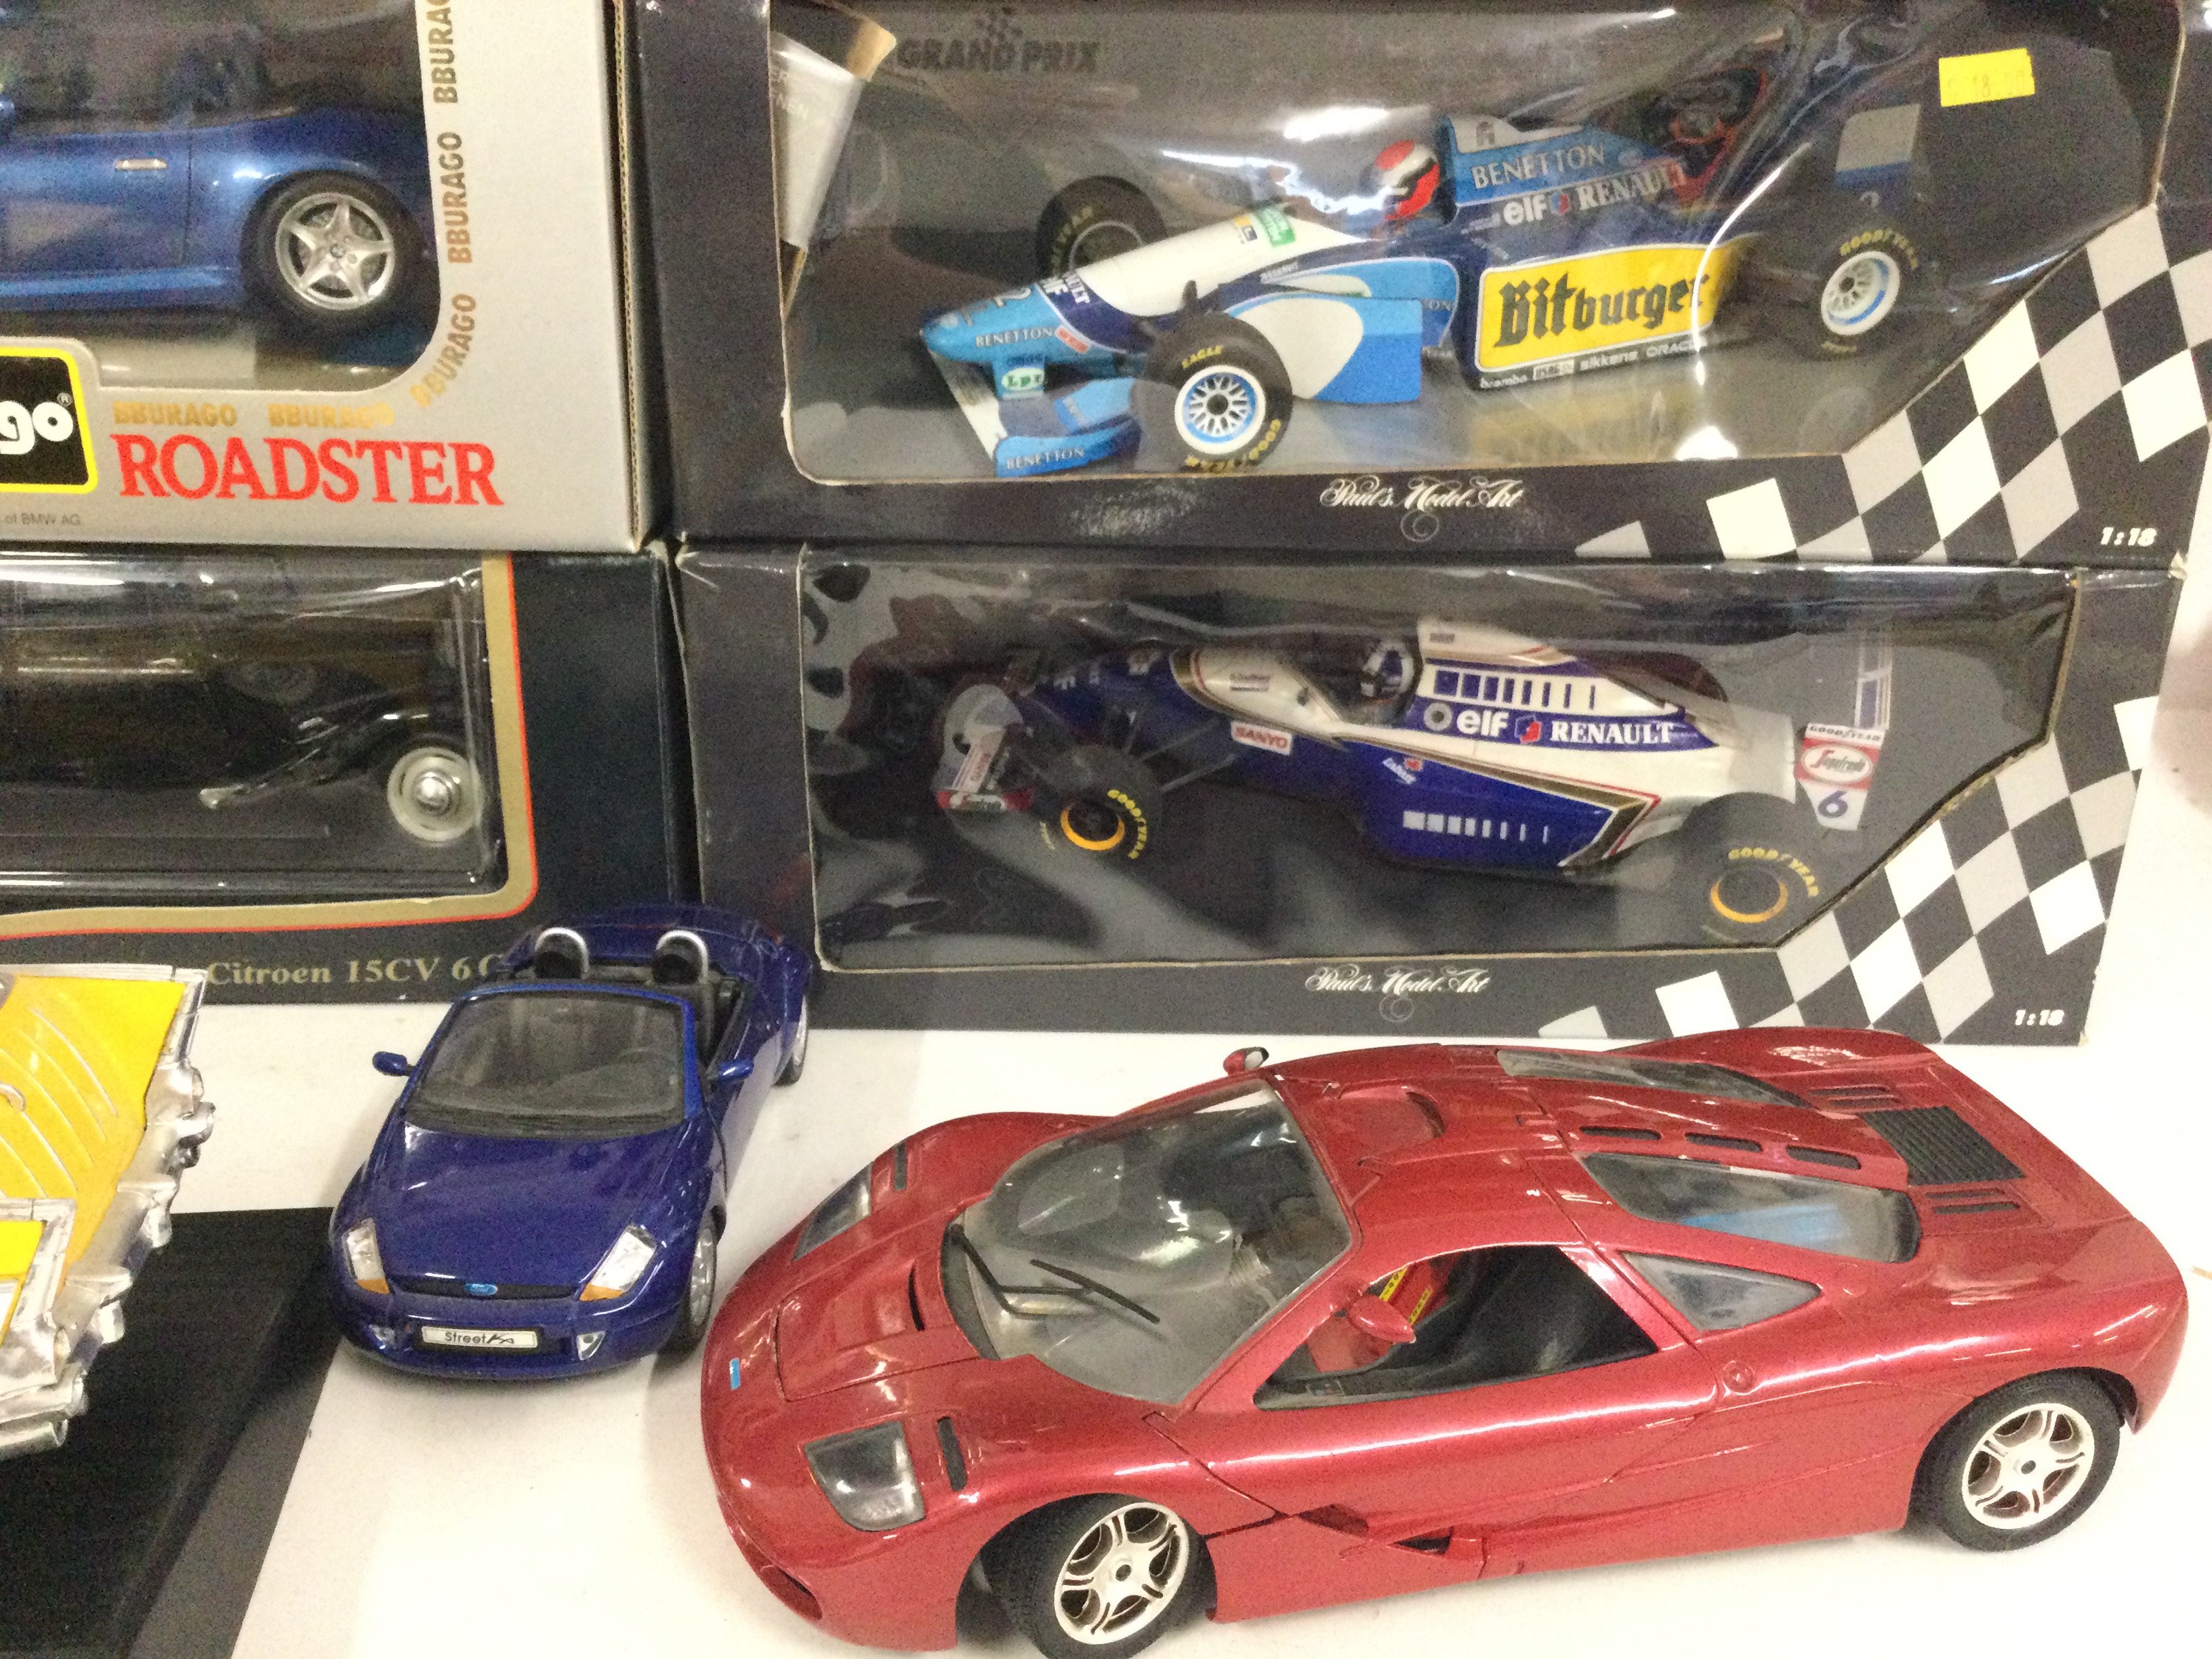 A Collection of Boxed Diecast Vehicles including Burago. Maisto Corgi. All 1:18 Scale. - Image 5 of 5